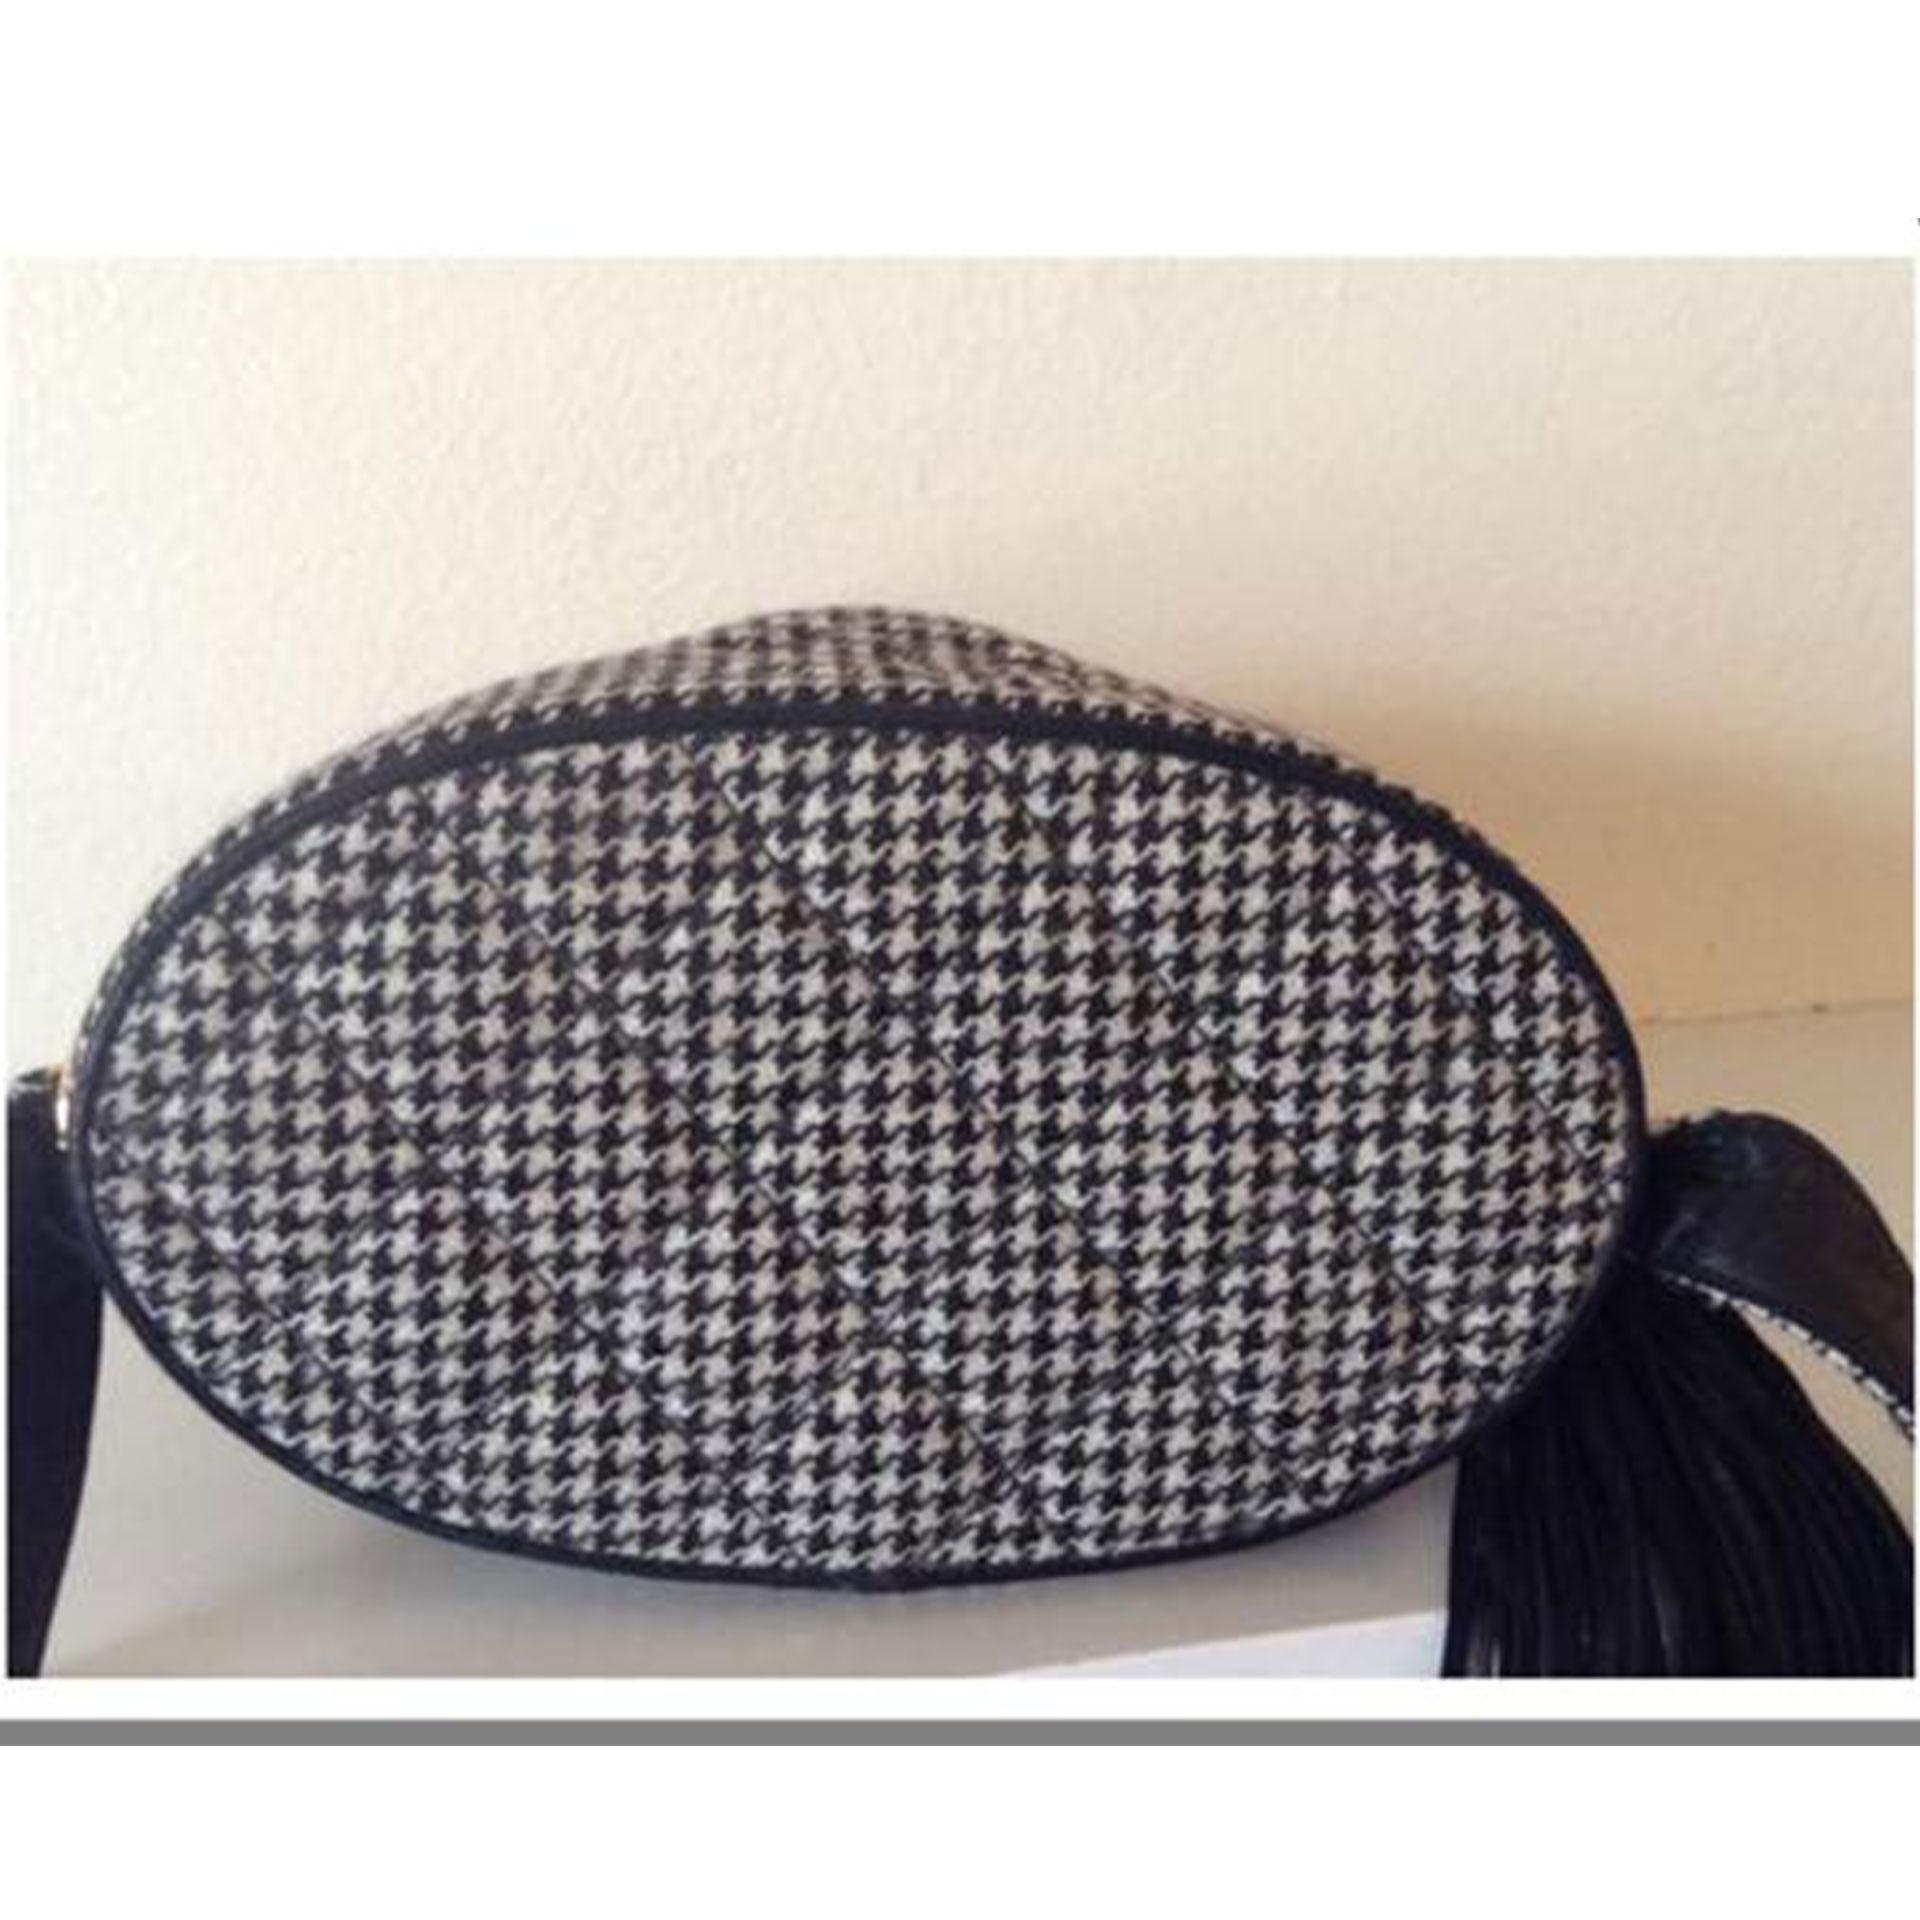 Chanel Vanity Case Very Rare Vintage 1990’s Houndstooth Black and White Wool Bag In Good Condition For Sale In Miami, FL